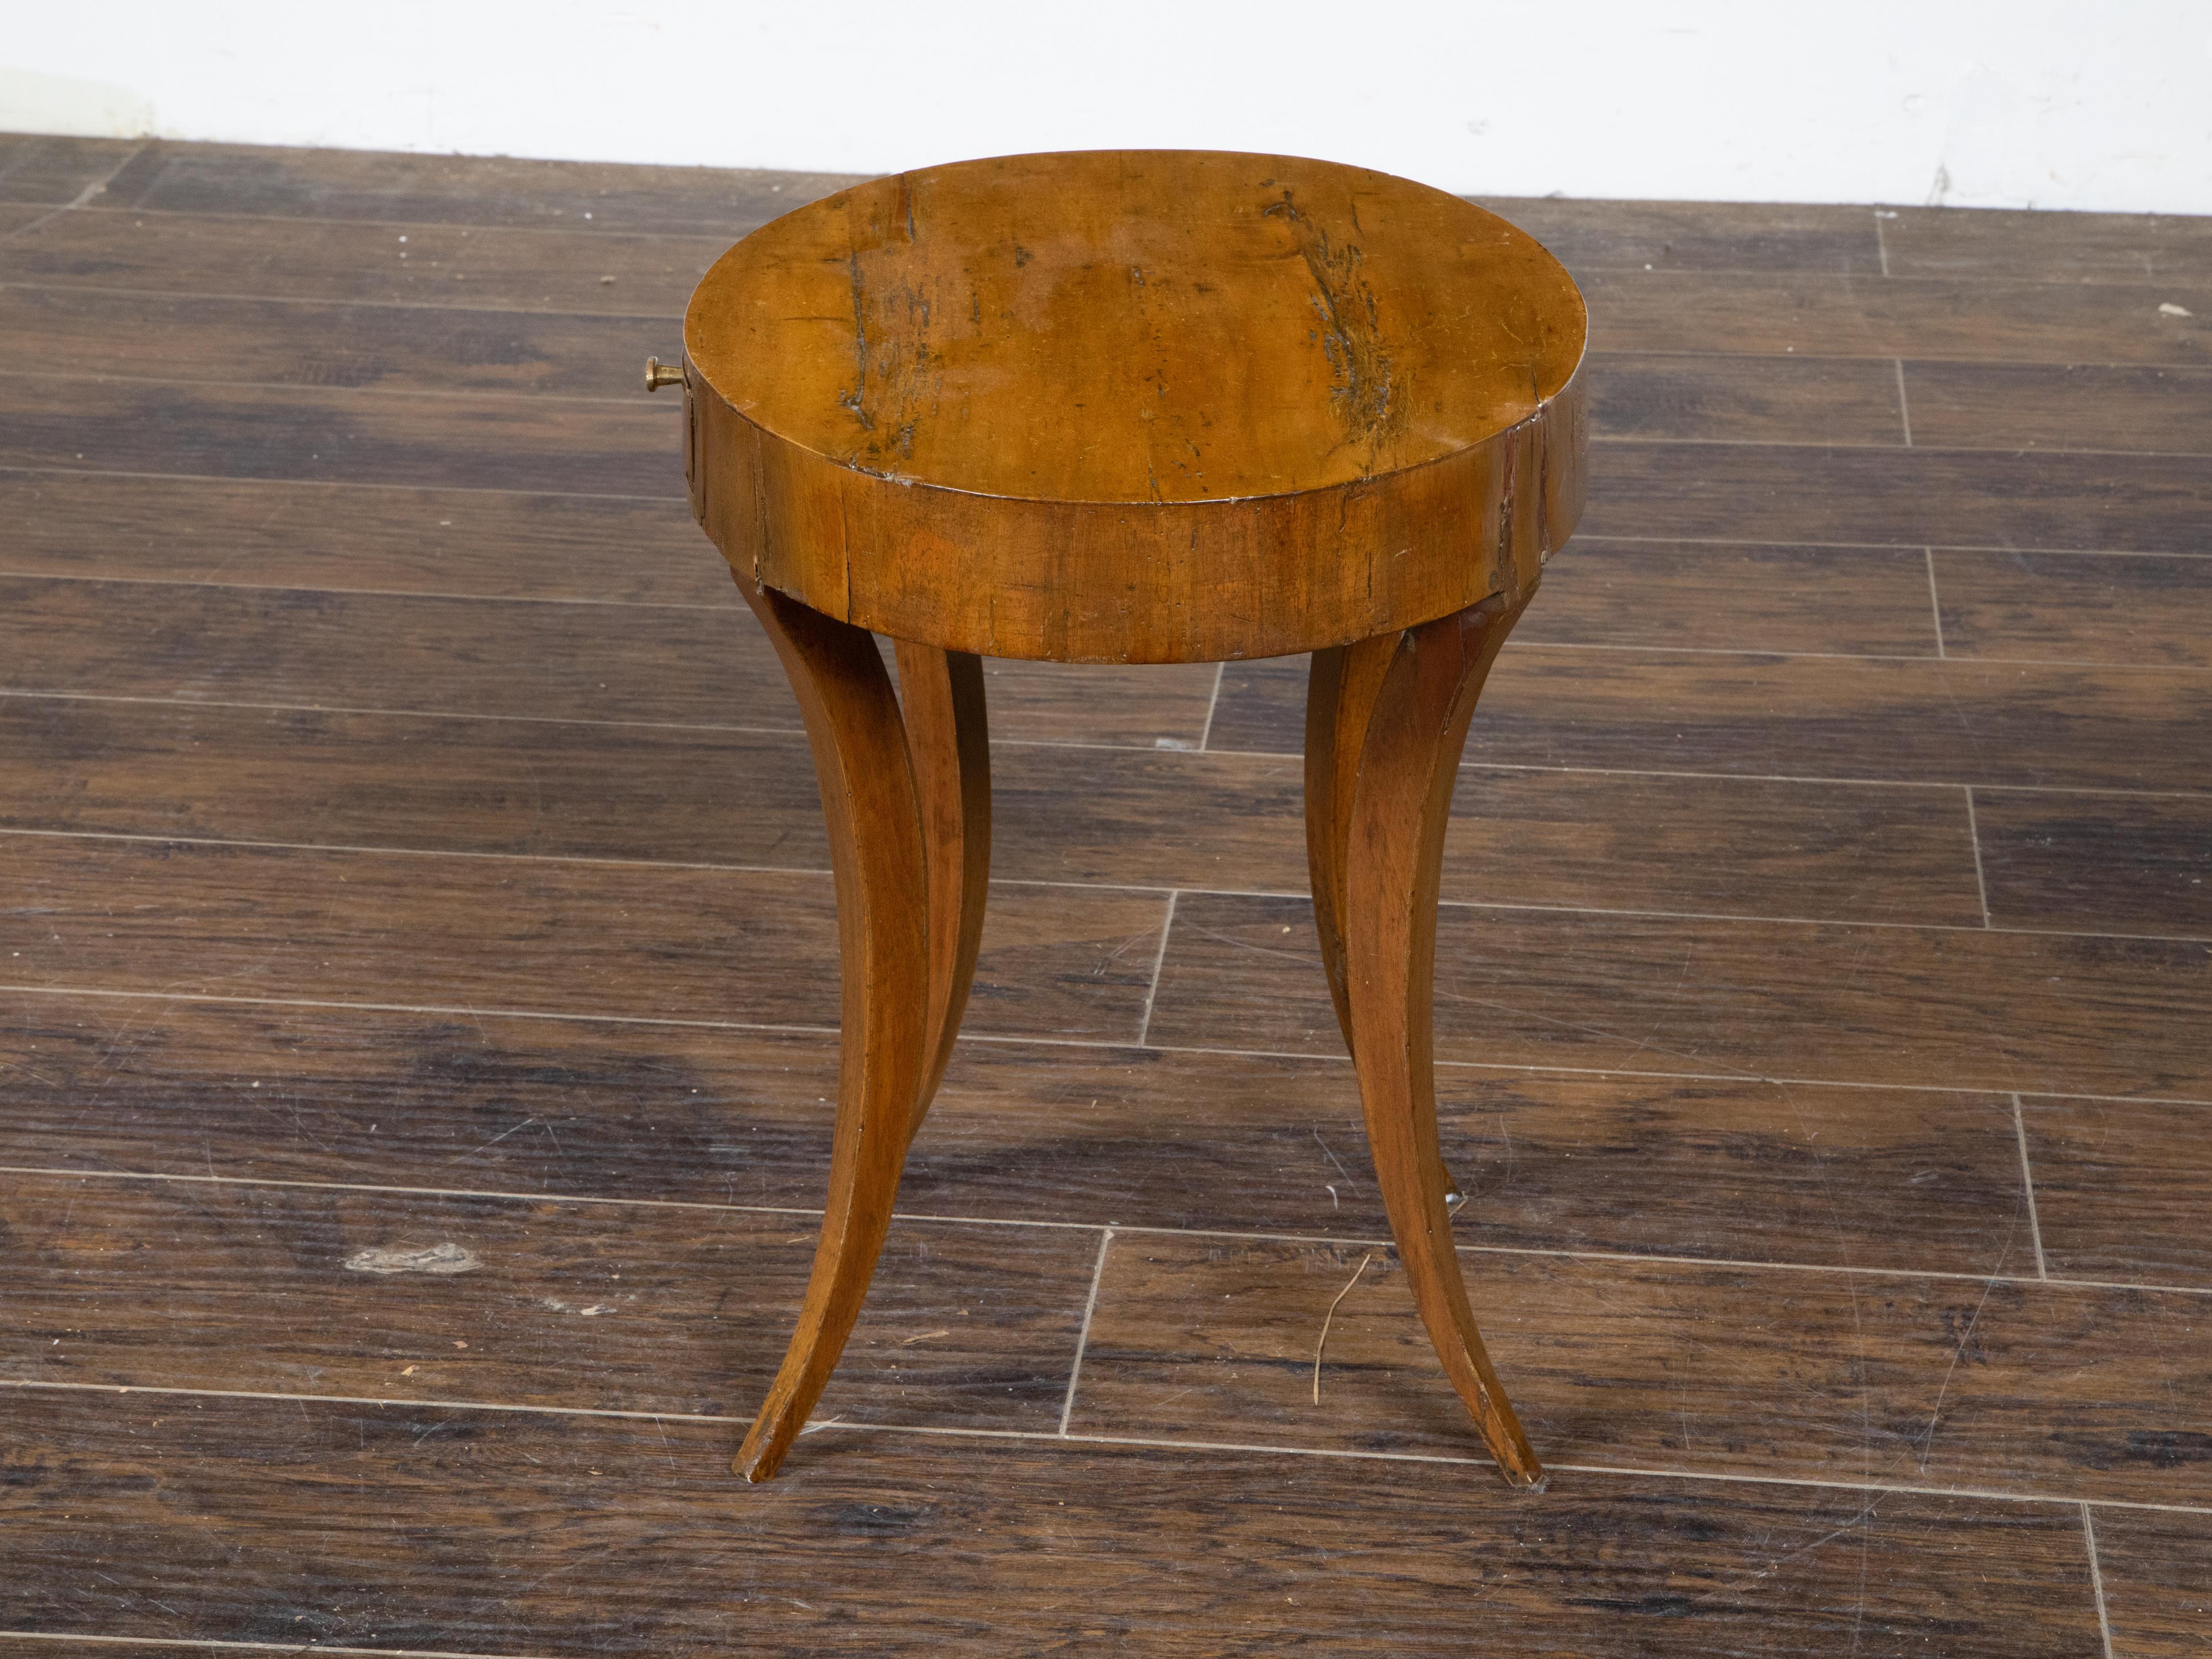 Italian Neoclassical 1810s Walnut Table with Oval Top, Drawer and Saber Legs For Sale 3